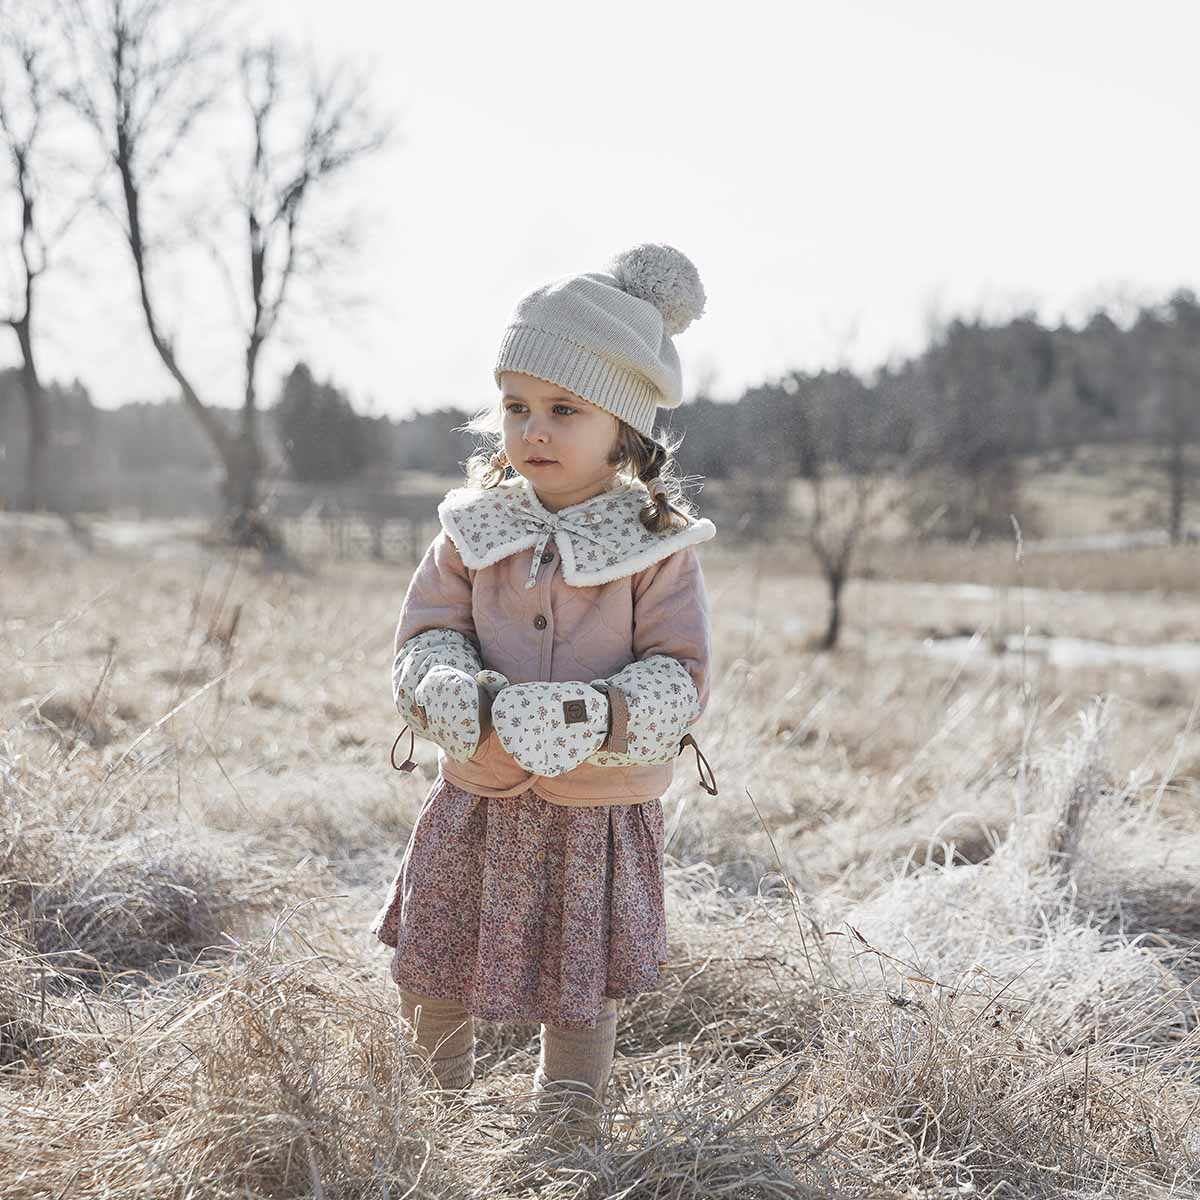 AW22-Winter-on-the-Prairie-Knitted-Beret-Creamy-White-Collar-Autumn-Rose-Mittens-LP